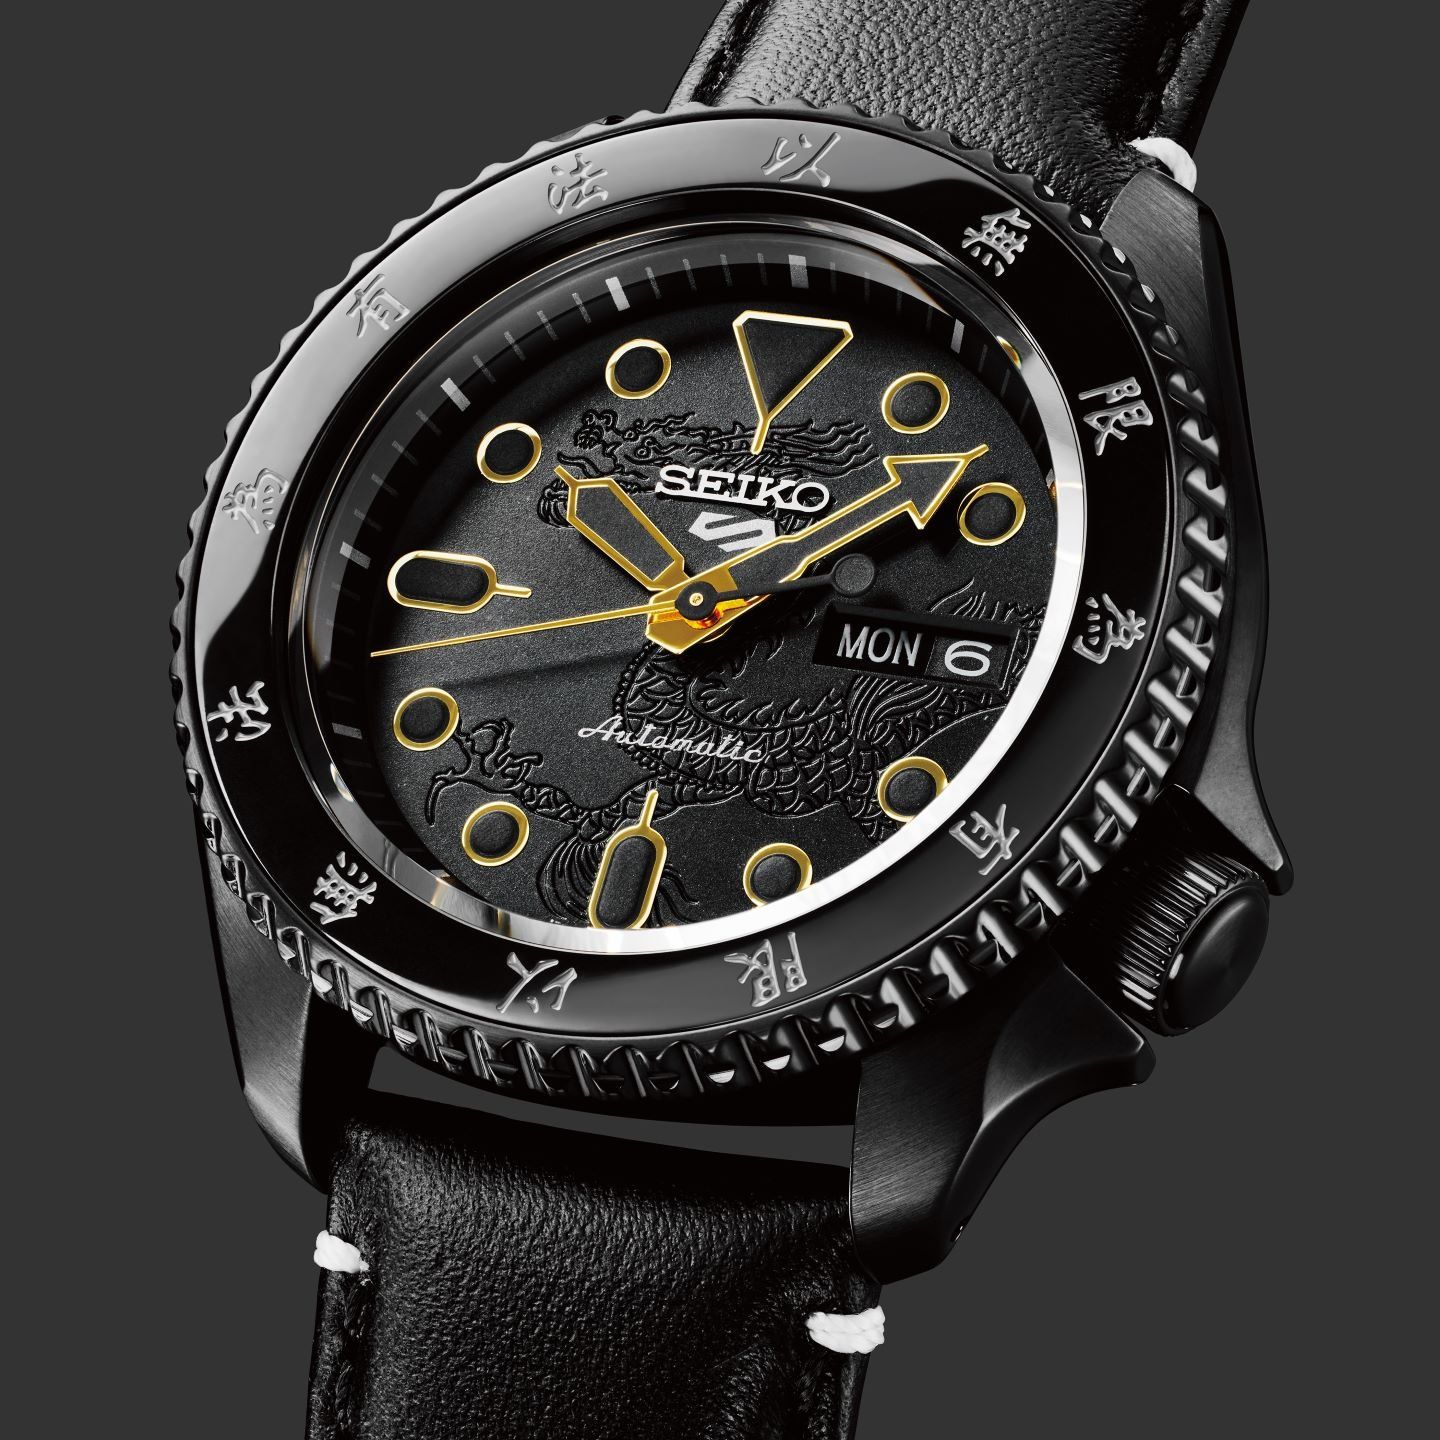 Bruce Lee Seiko 5 Sports watch features thoughtful design